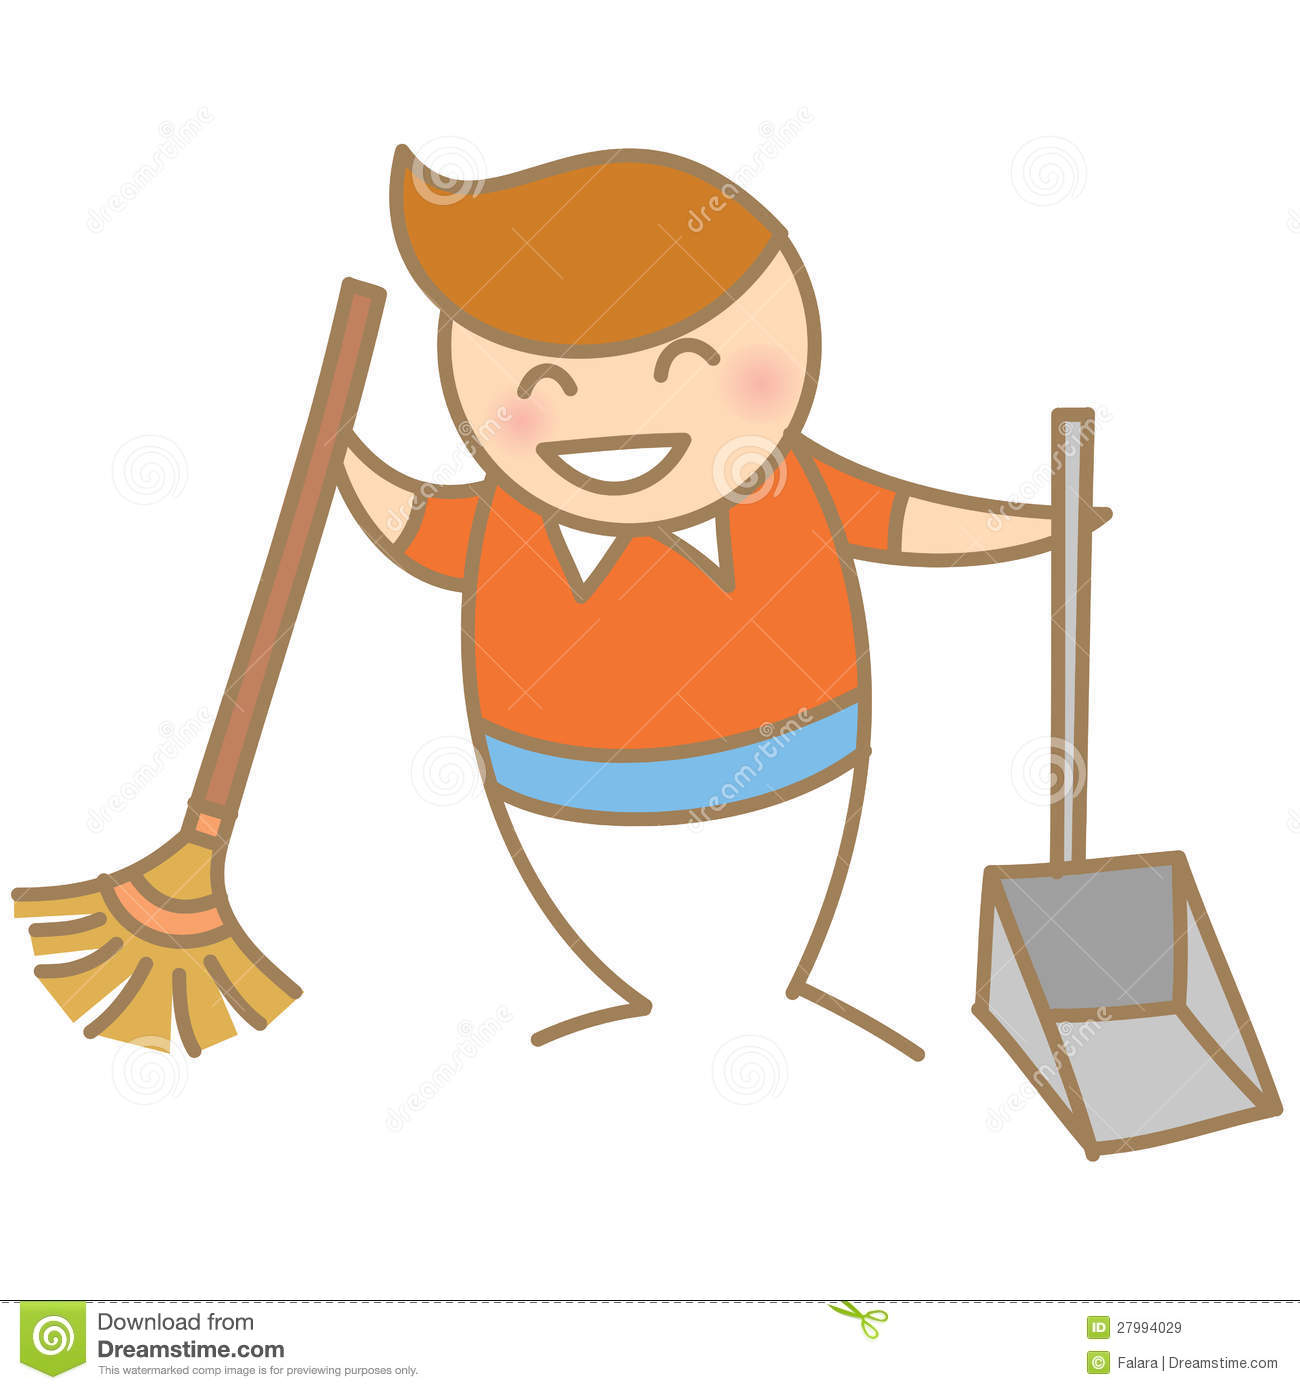 Boy Cleaning House Smiling Royalty Free Stock Images   Image  27994029